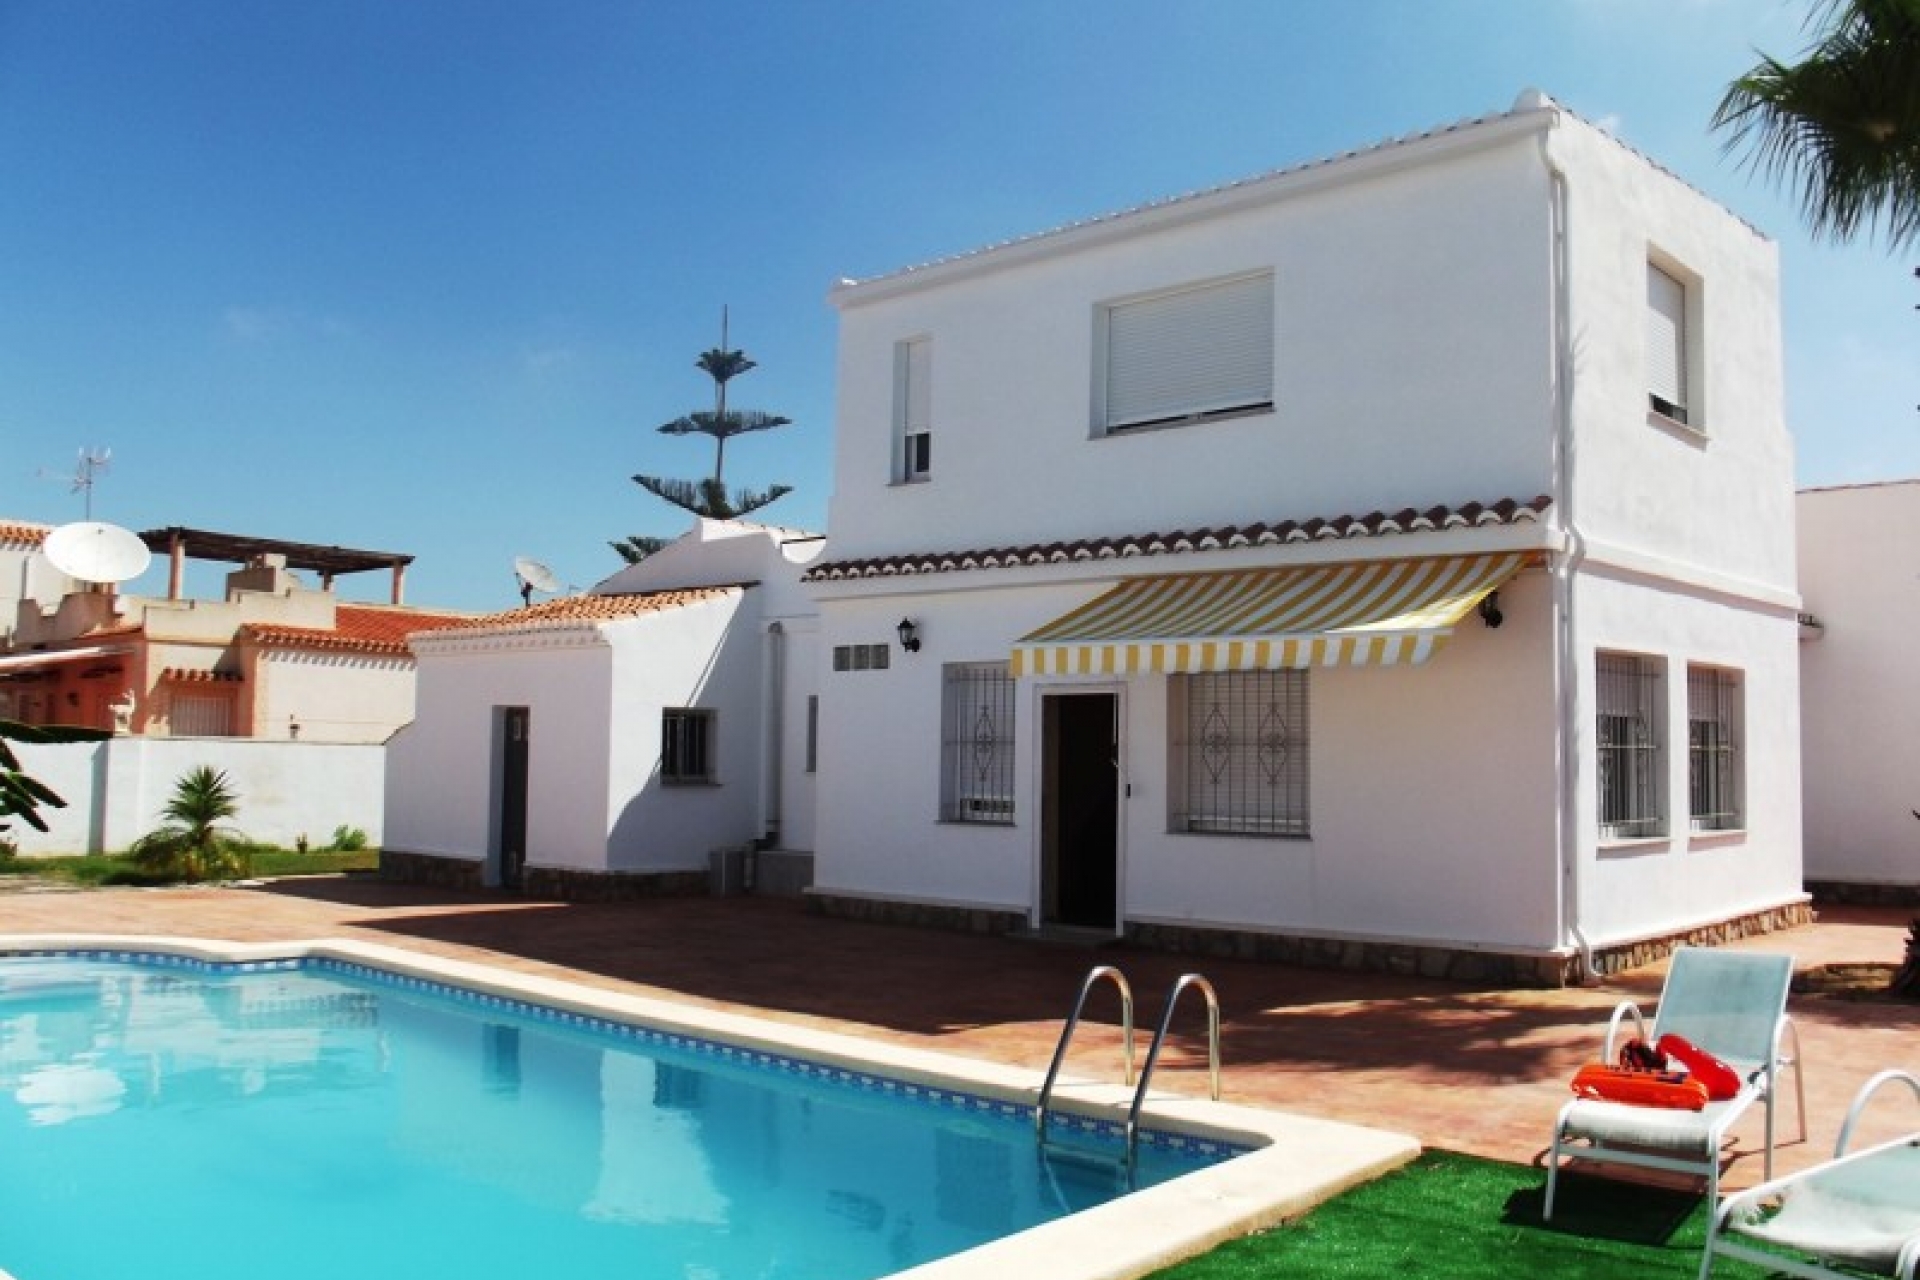 Cheap, bargain property for sale in Torreta Florida close to Torrevieja and La Siesta on Spains Costa Blanca